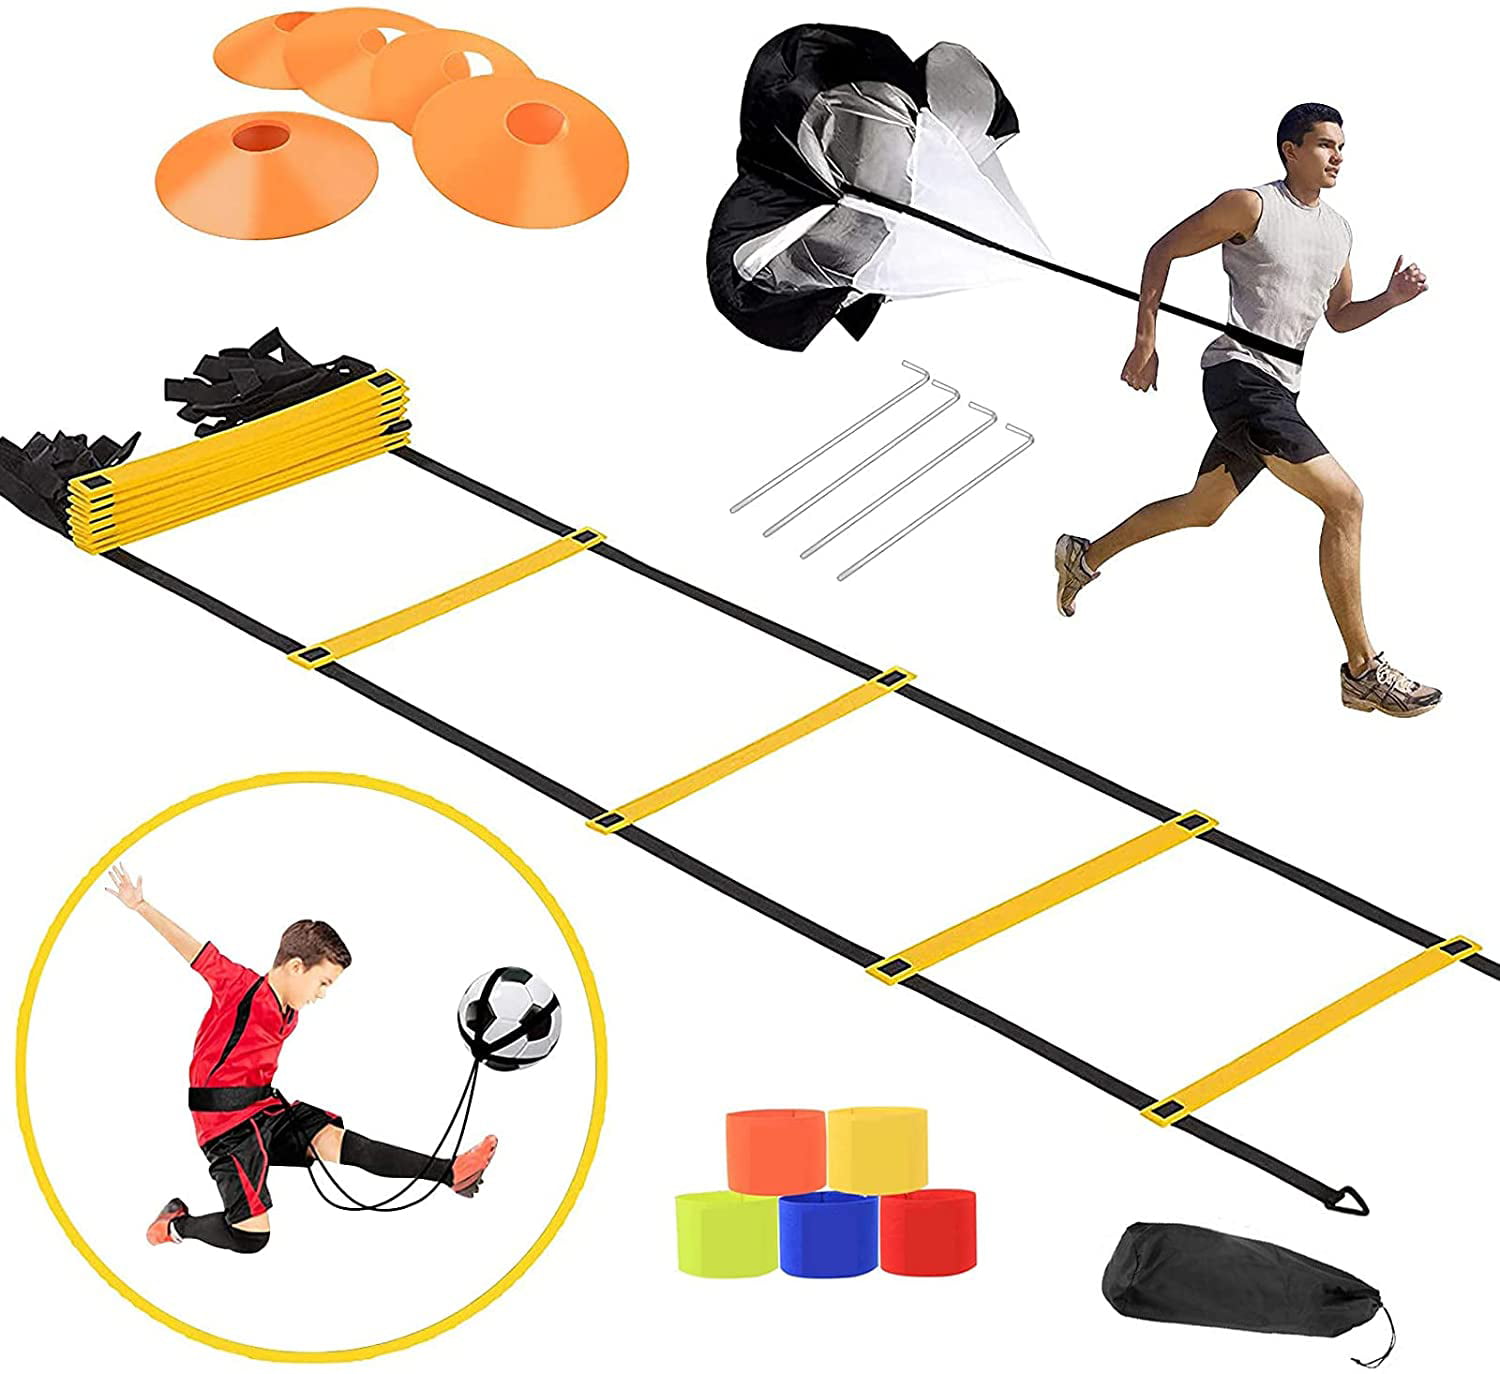 Includes 12 Rung Agility Ladder,Running Agility Ladder Speed Training Equipment 